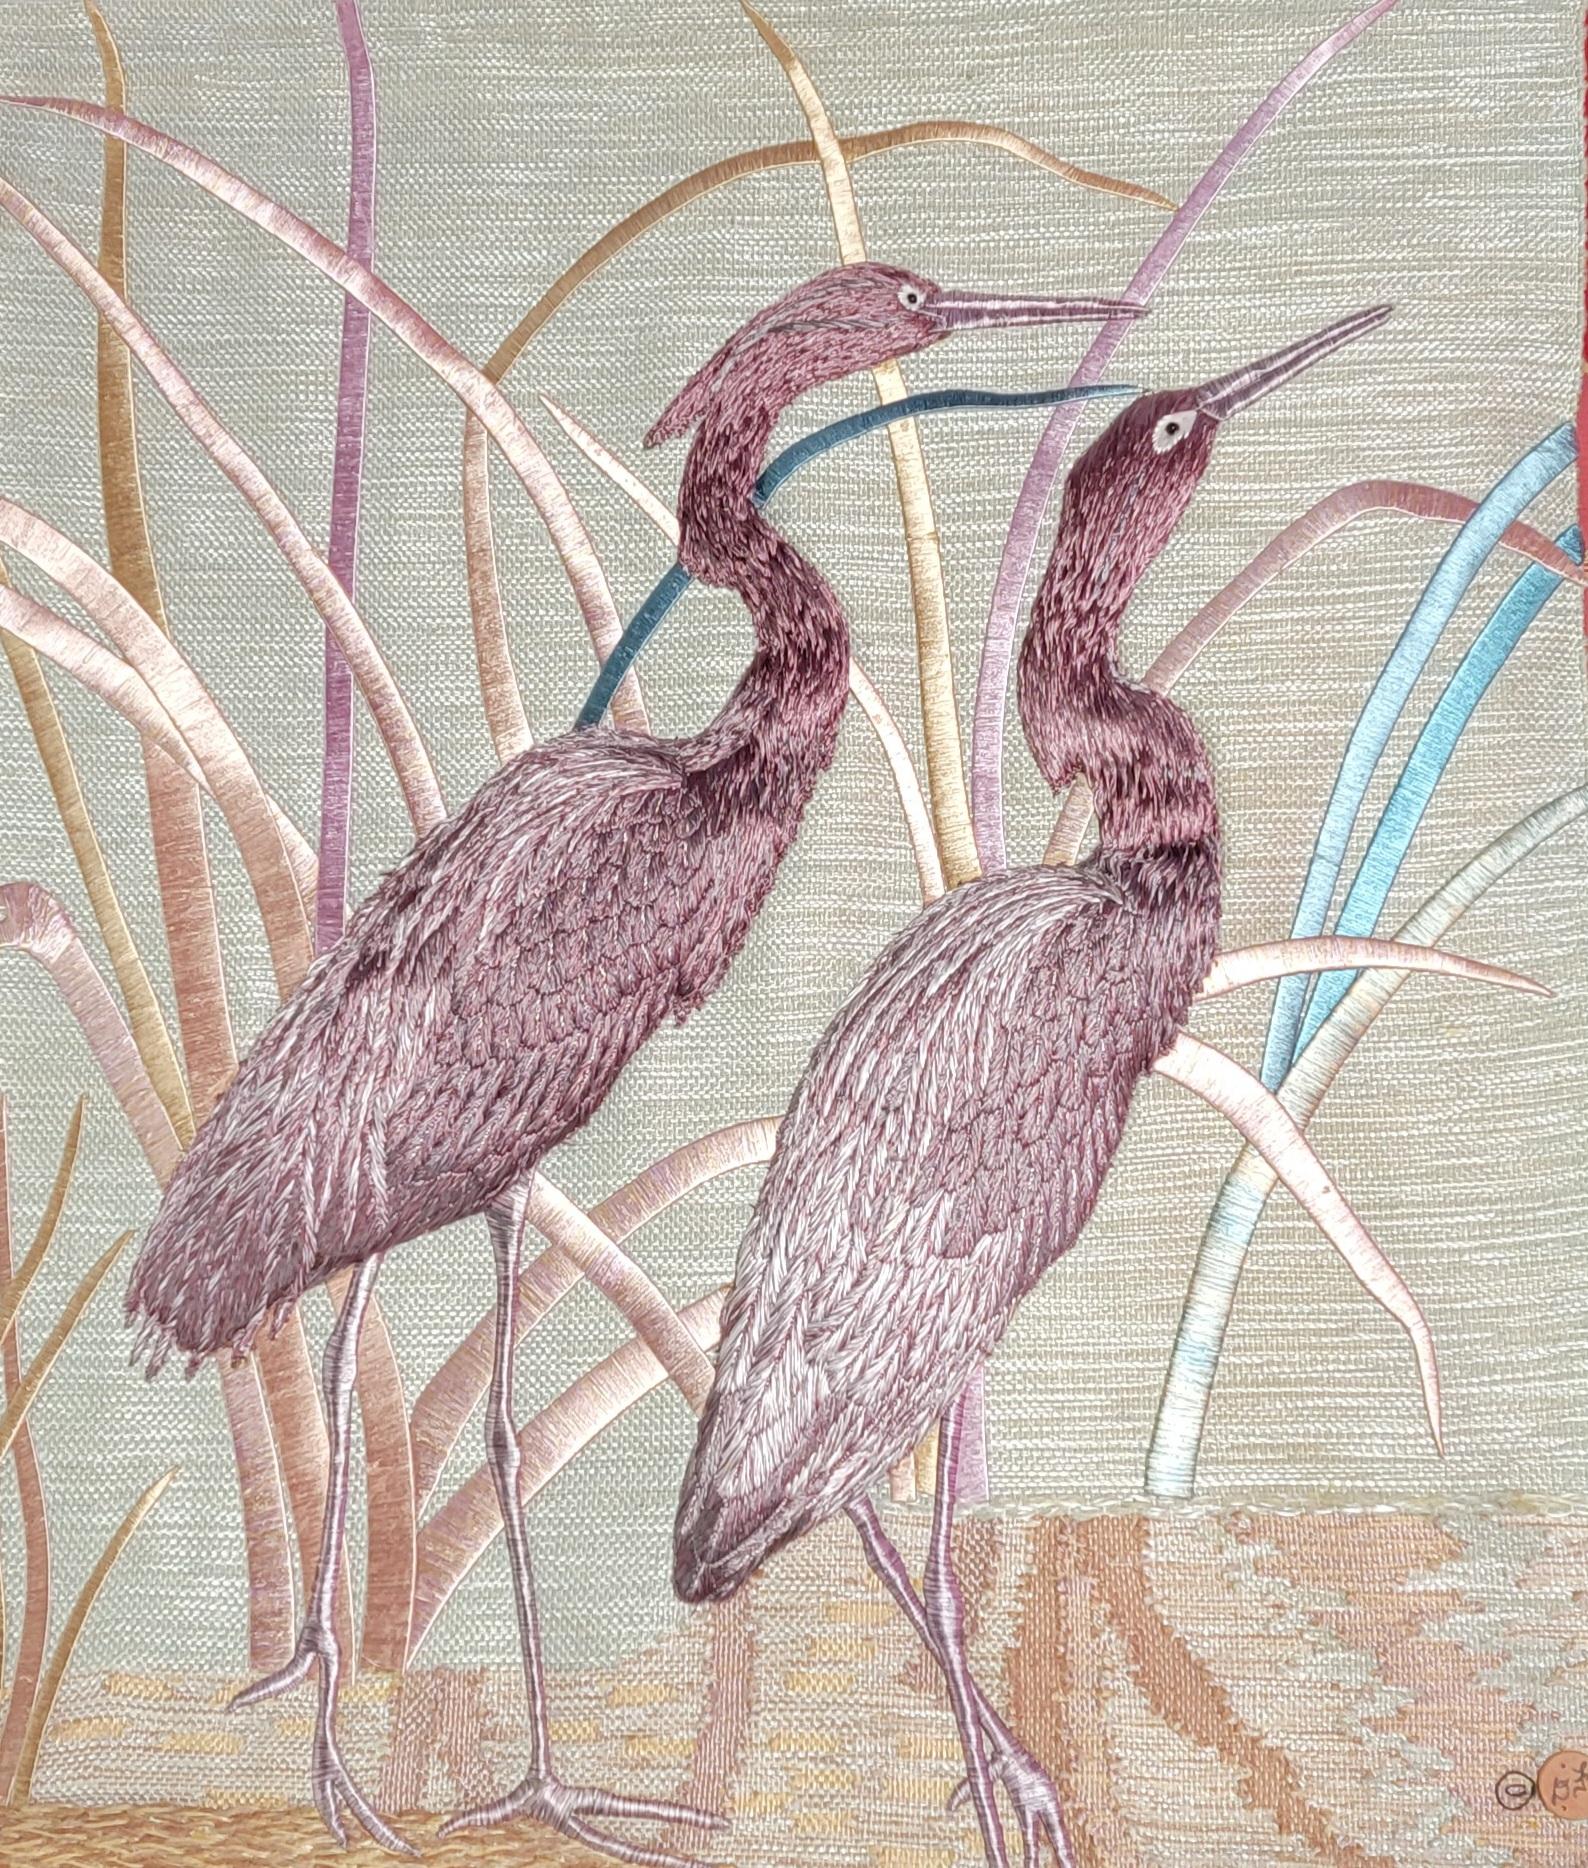 Woven textile wall art by Don Freedman. Highly textured bird motif textile featuring two Heron's in the marsh with tule in background. Signed lower right corner. Retains cloth label verso. Large-scale measures 44